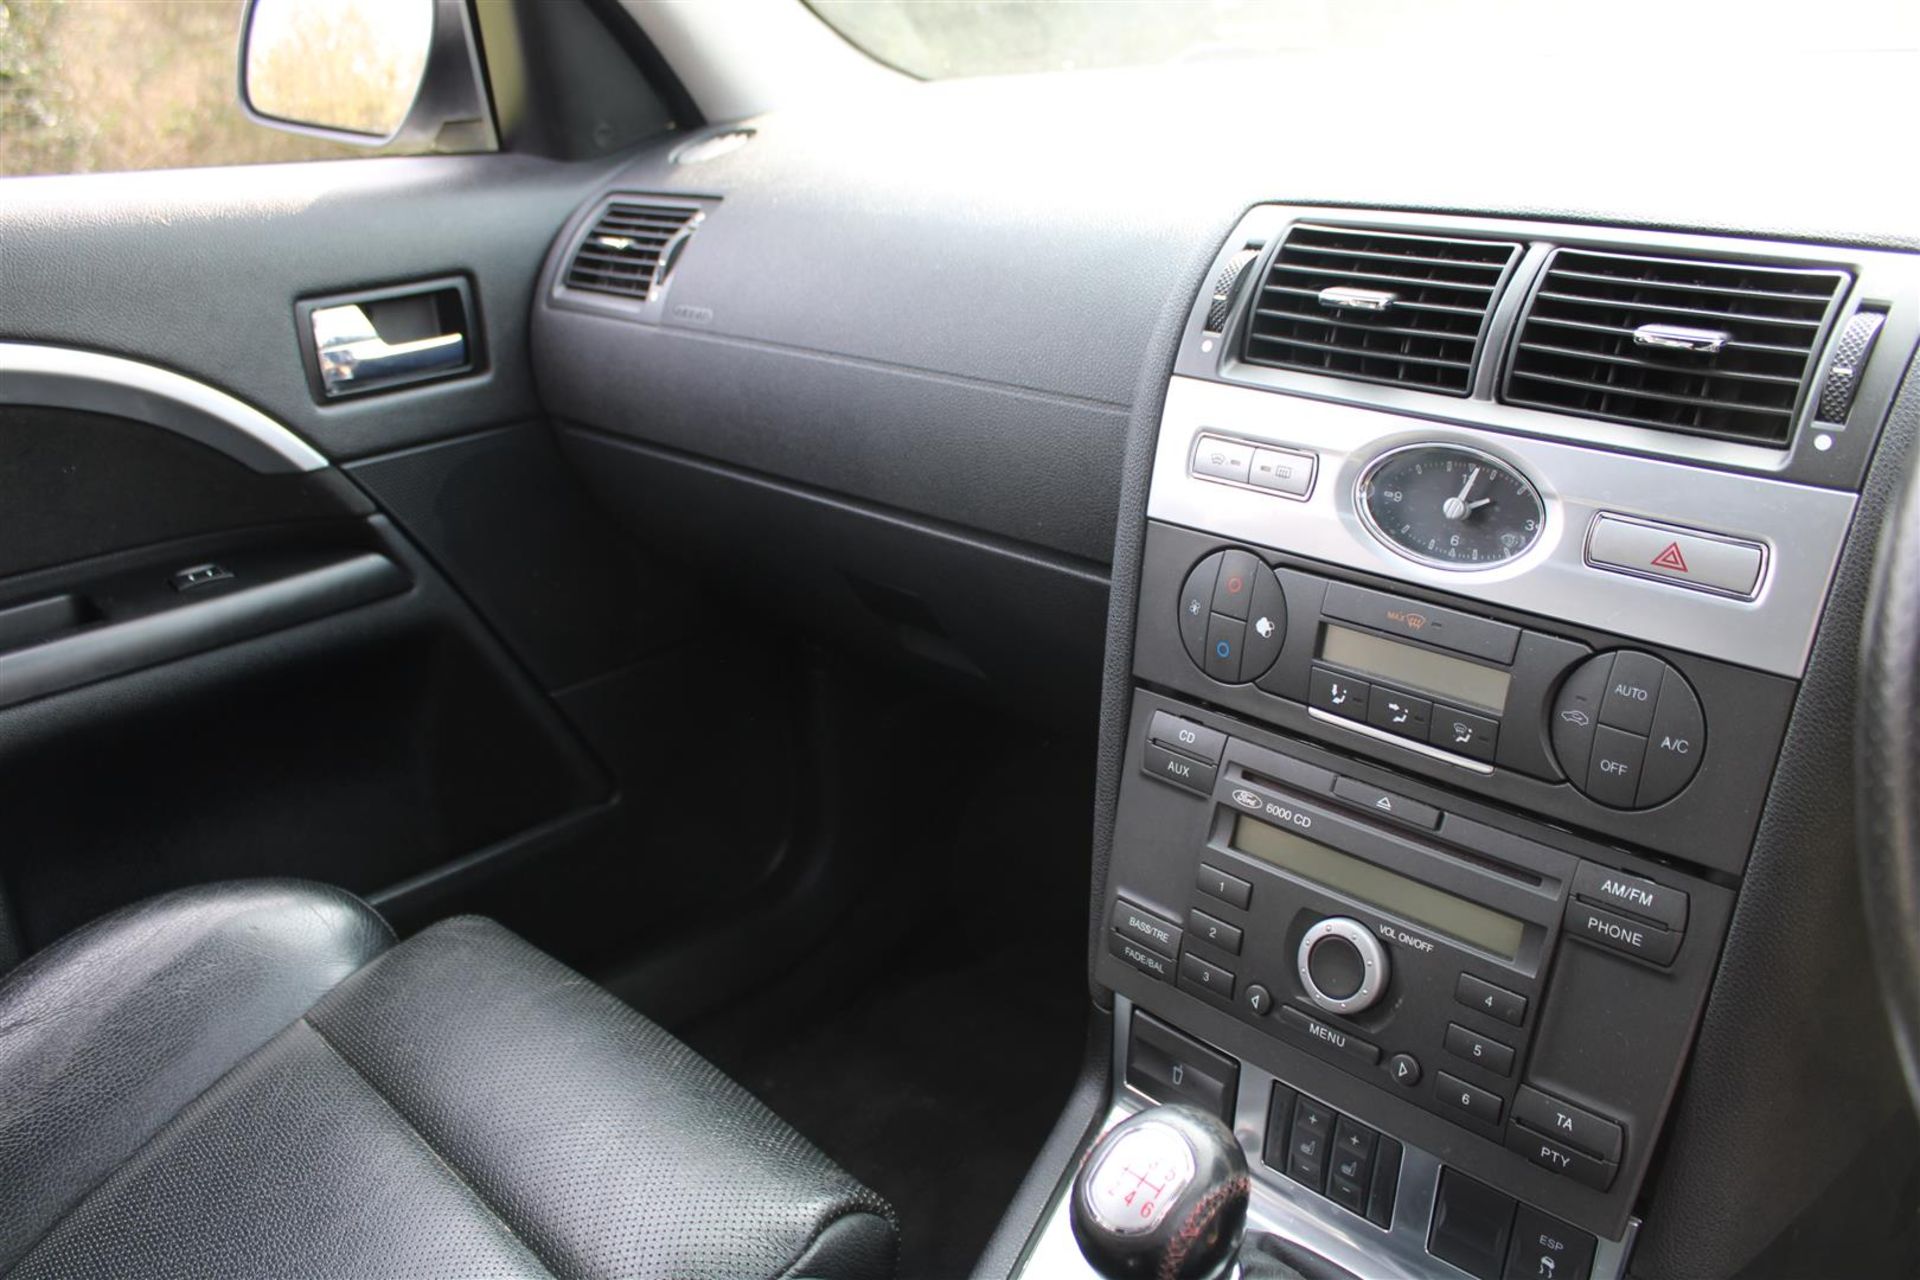 2005 Ford Mondeo ST220 Estate - Image 9 of 19